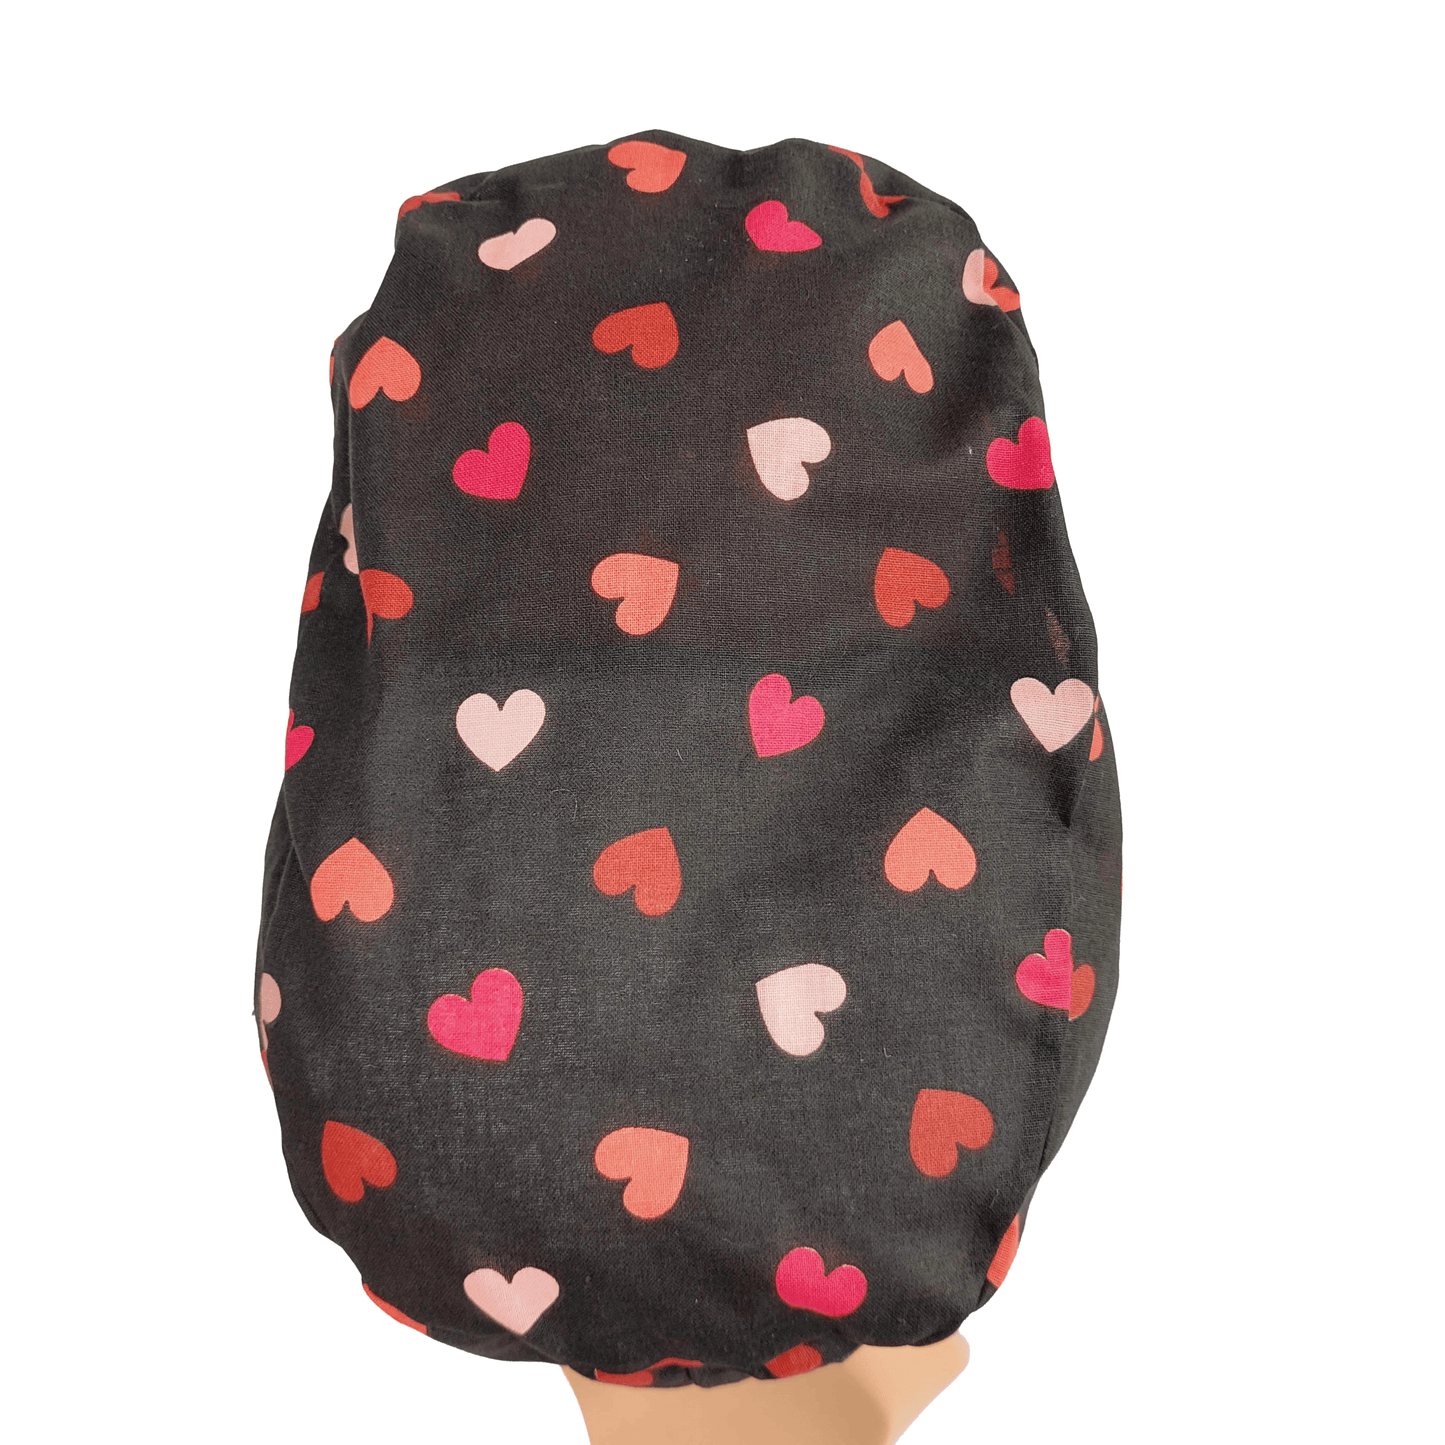 Euro Surgical Scrub Cap With Red and Pink Hearts - [scrub_hat]-[scrub_cap_for_women]-[surgical_cap]